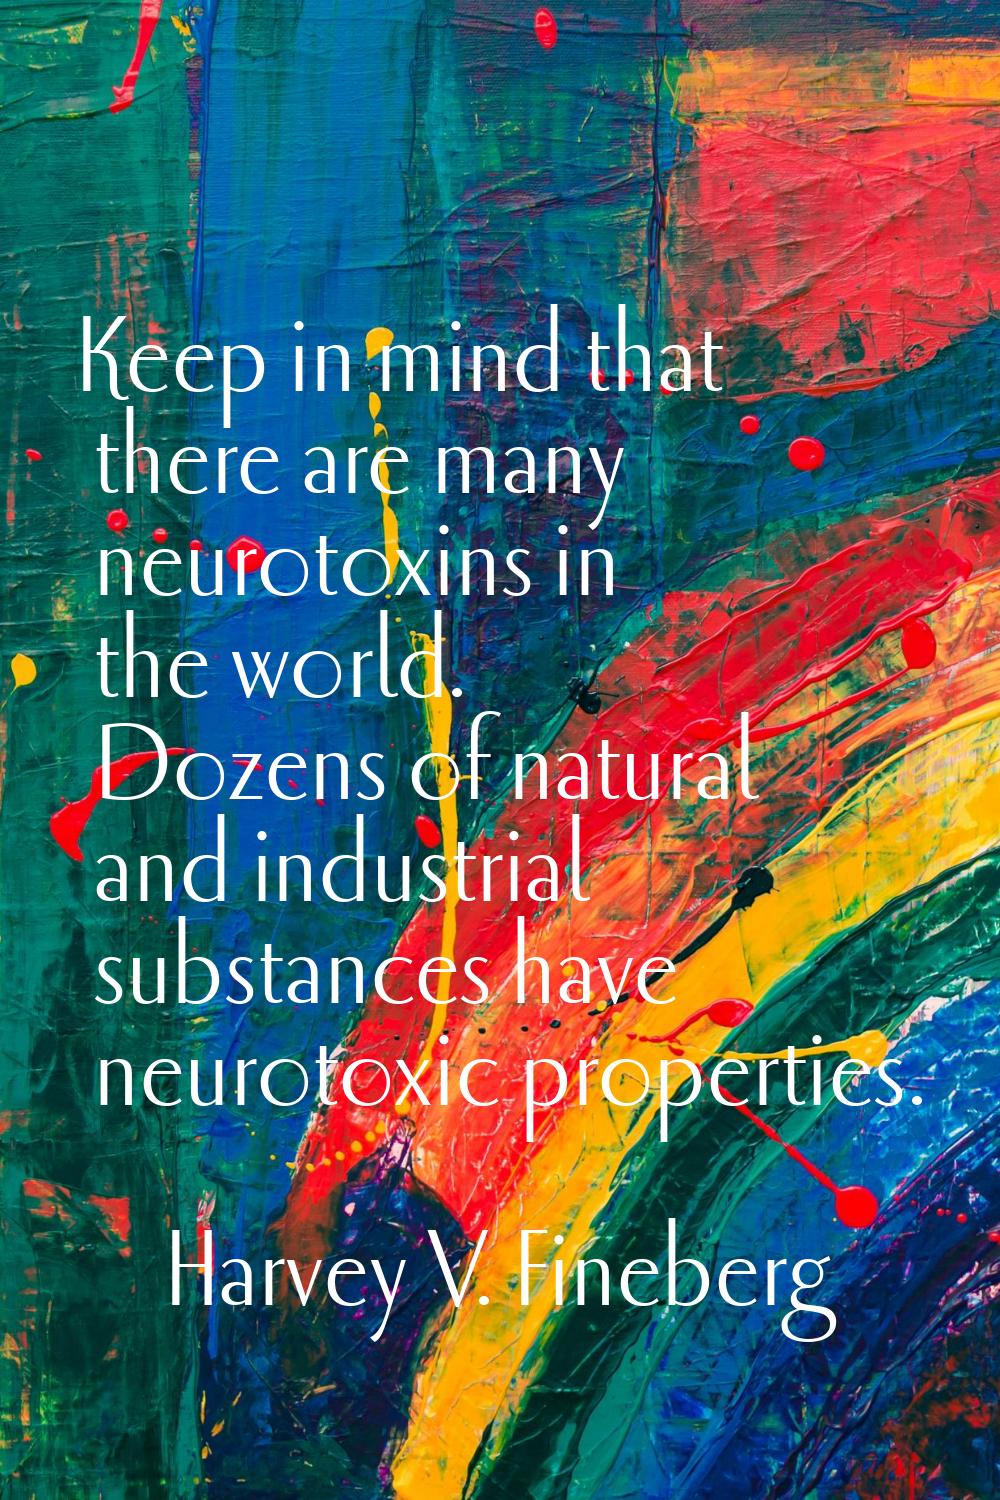 Keep in mind that there are many neurotoxins in the world. Dozens of natural and industrial substan